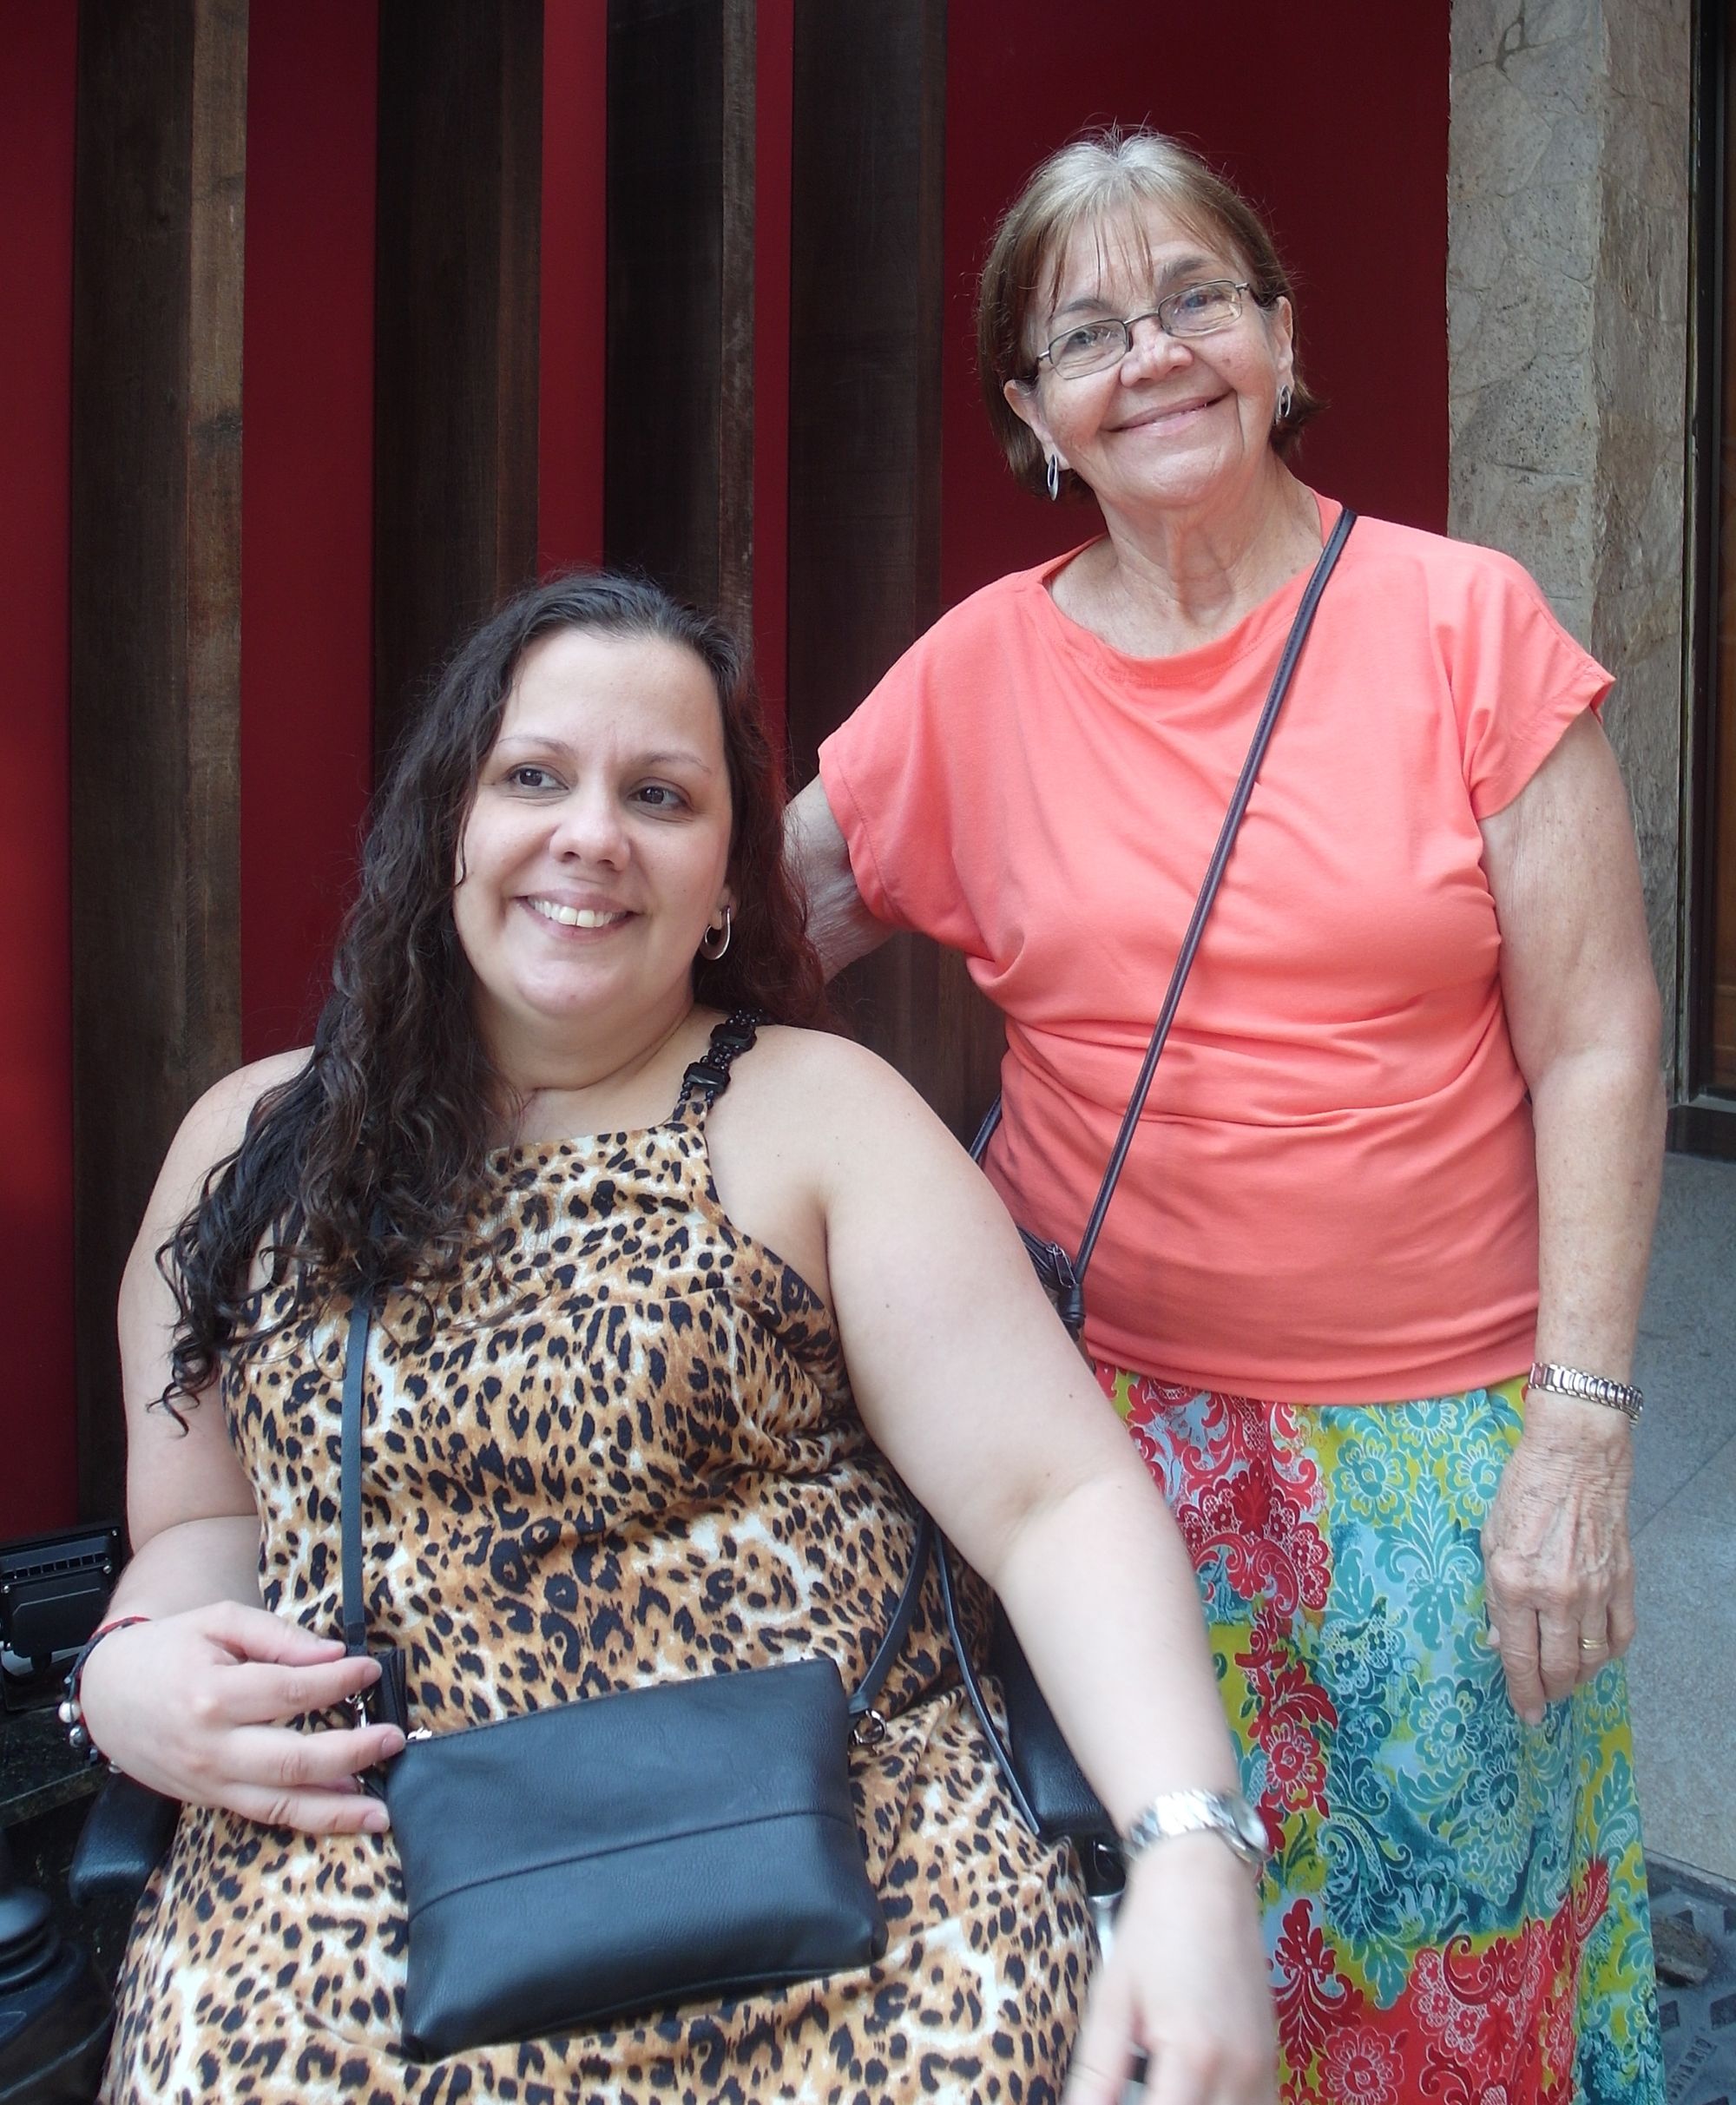 Sheila smiles with a glance off camera, dark hair curling down, sitting in a wheelchair with a leopard-print dress. Raylda to her right is an older woman smiling towards the camera and rose coloured top and colourful print dress.